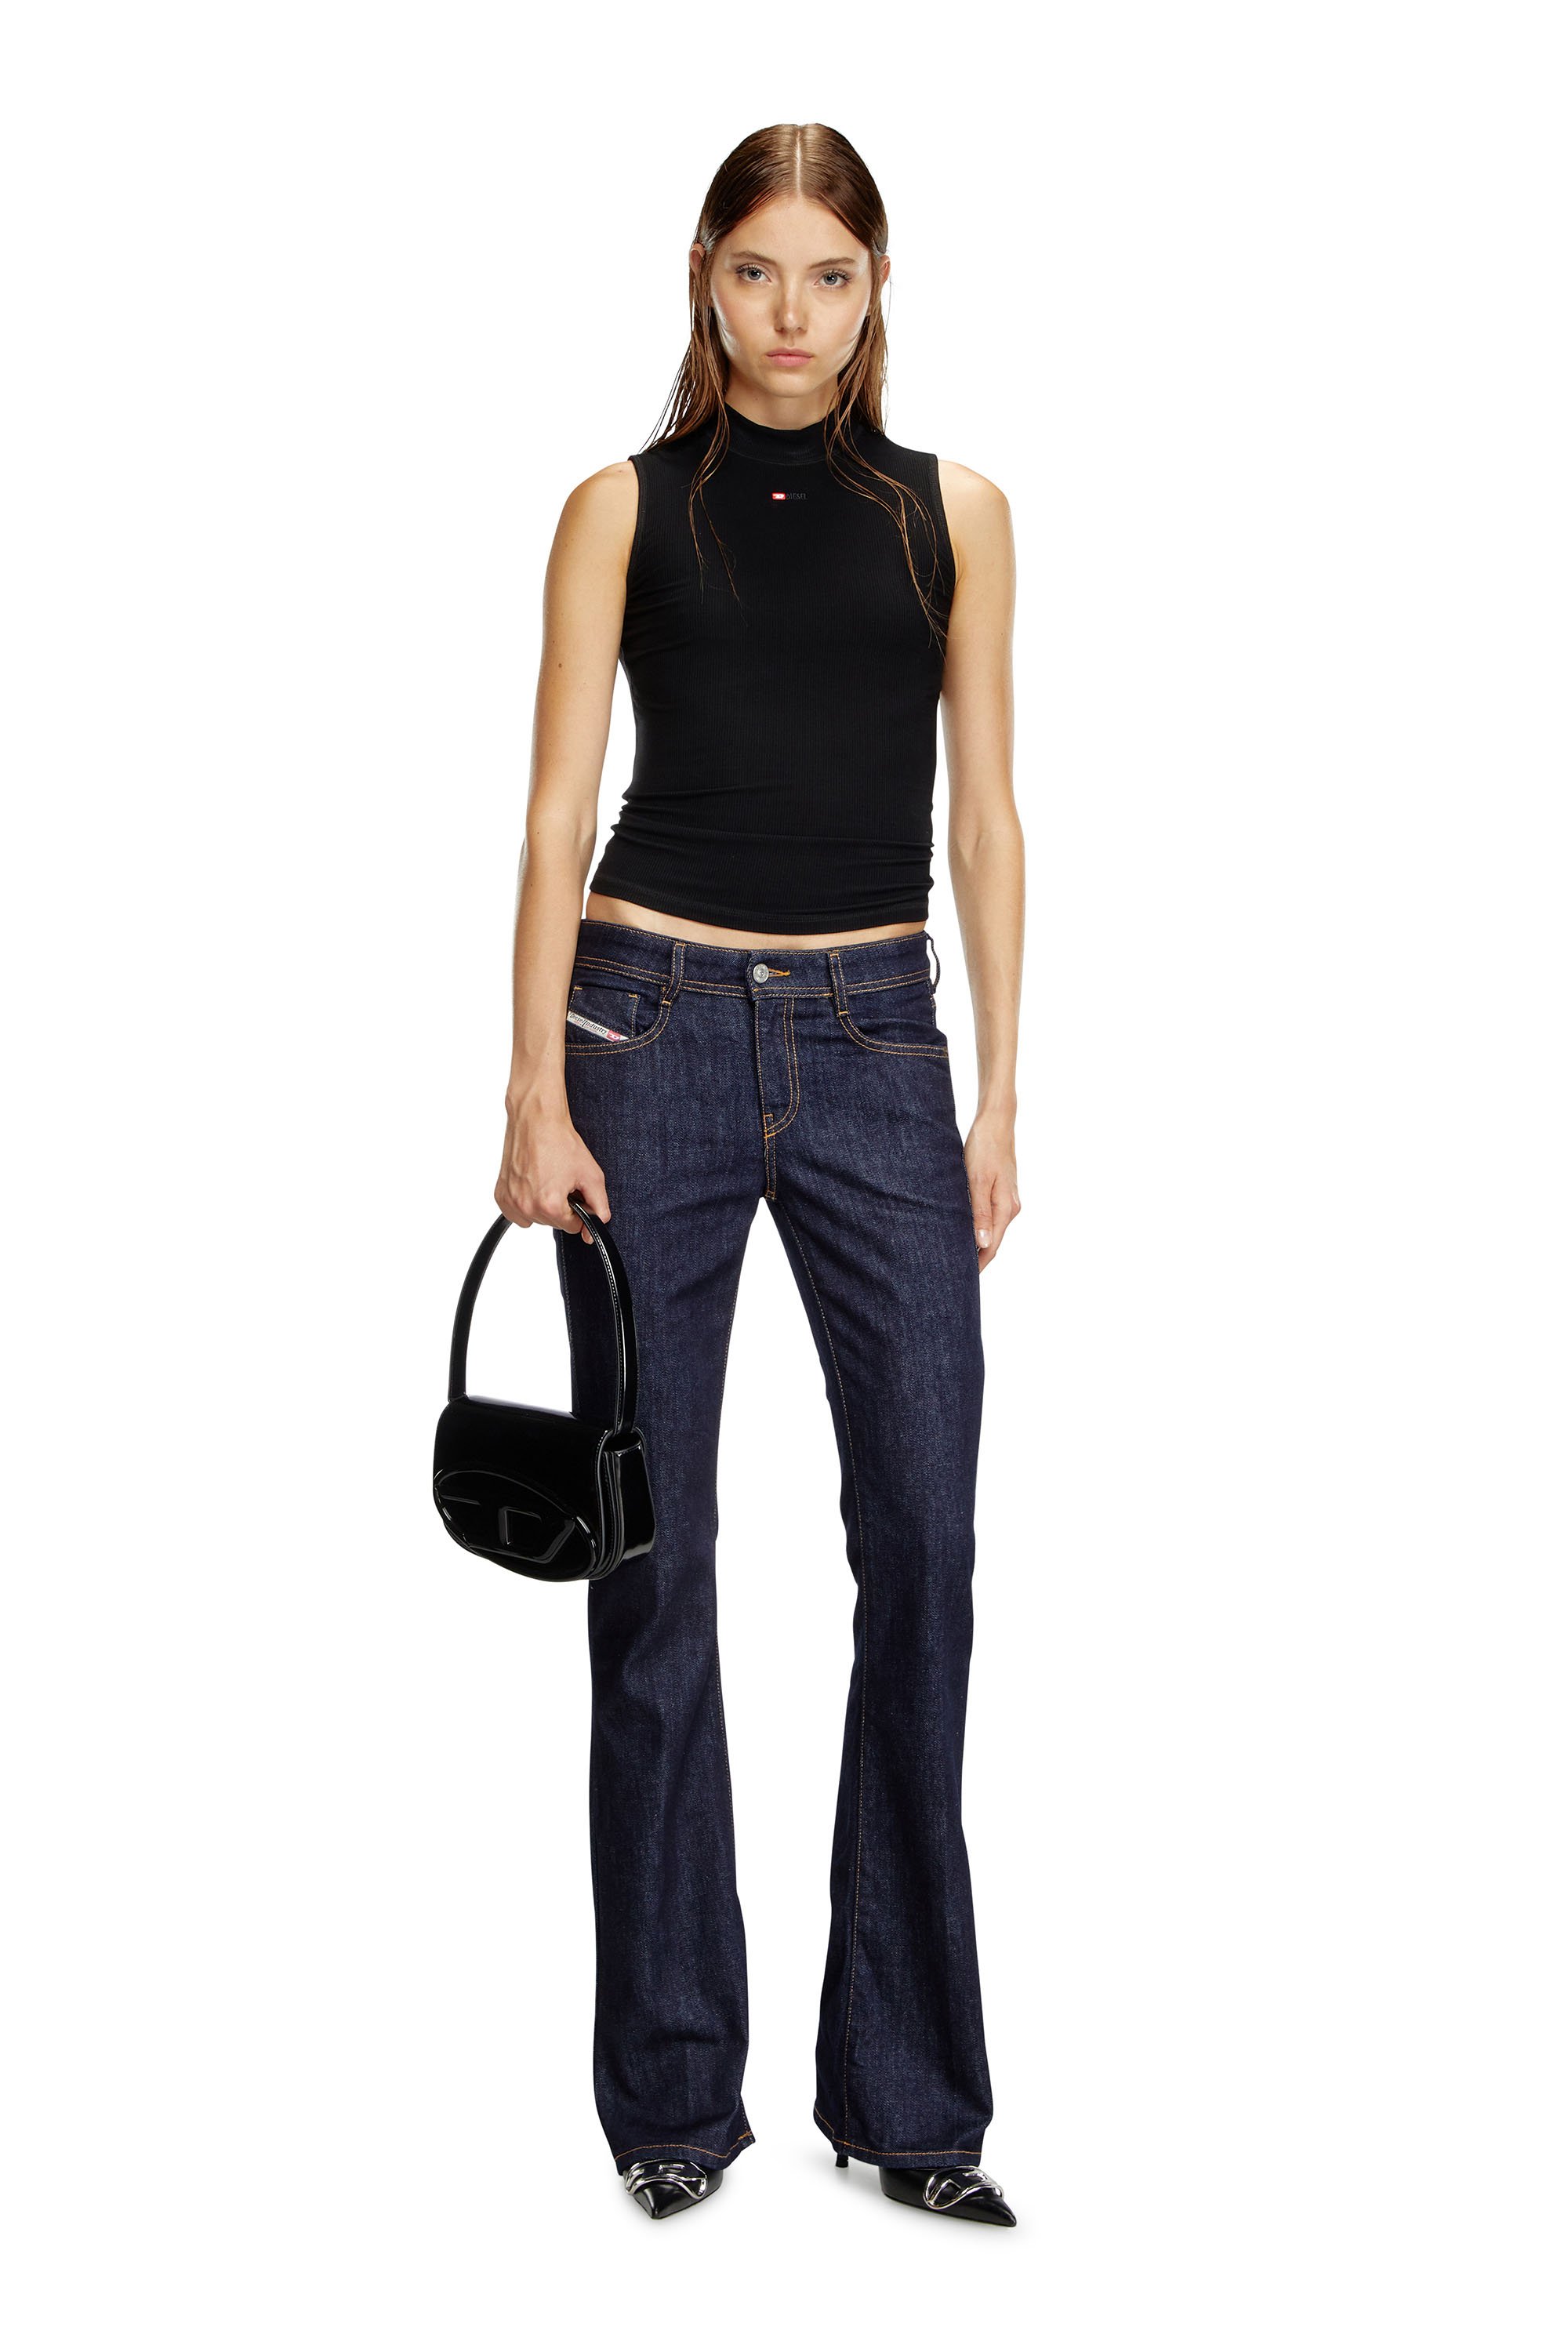 Diesel - Bootcut and Flare Jeans 1969 D-Ebbey Z9B89, Mujer Bootcut y Flare Jeans - 1969 D-Ebbey in Azul marino - Image 2